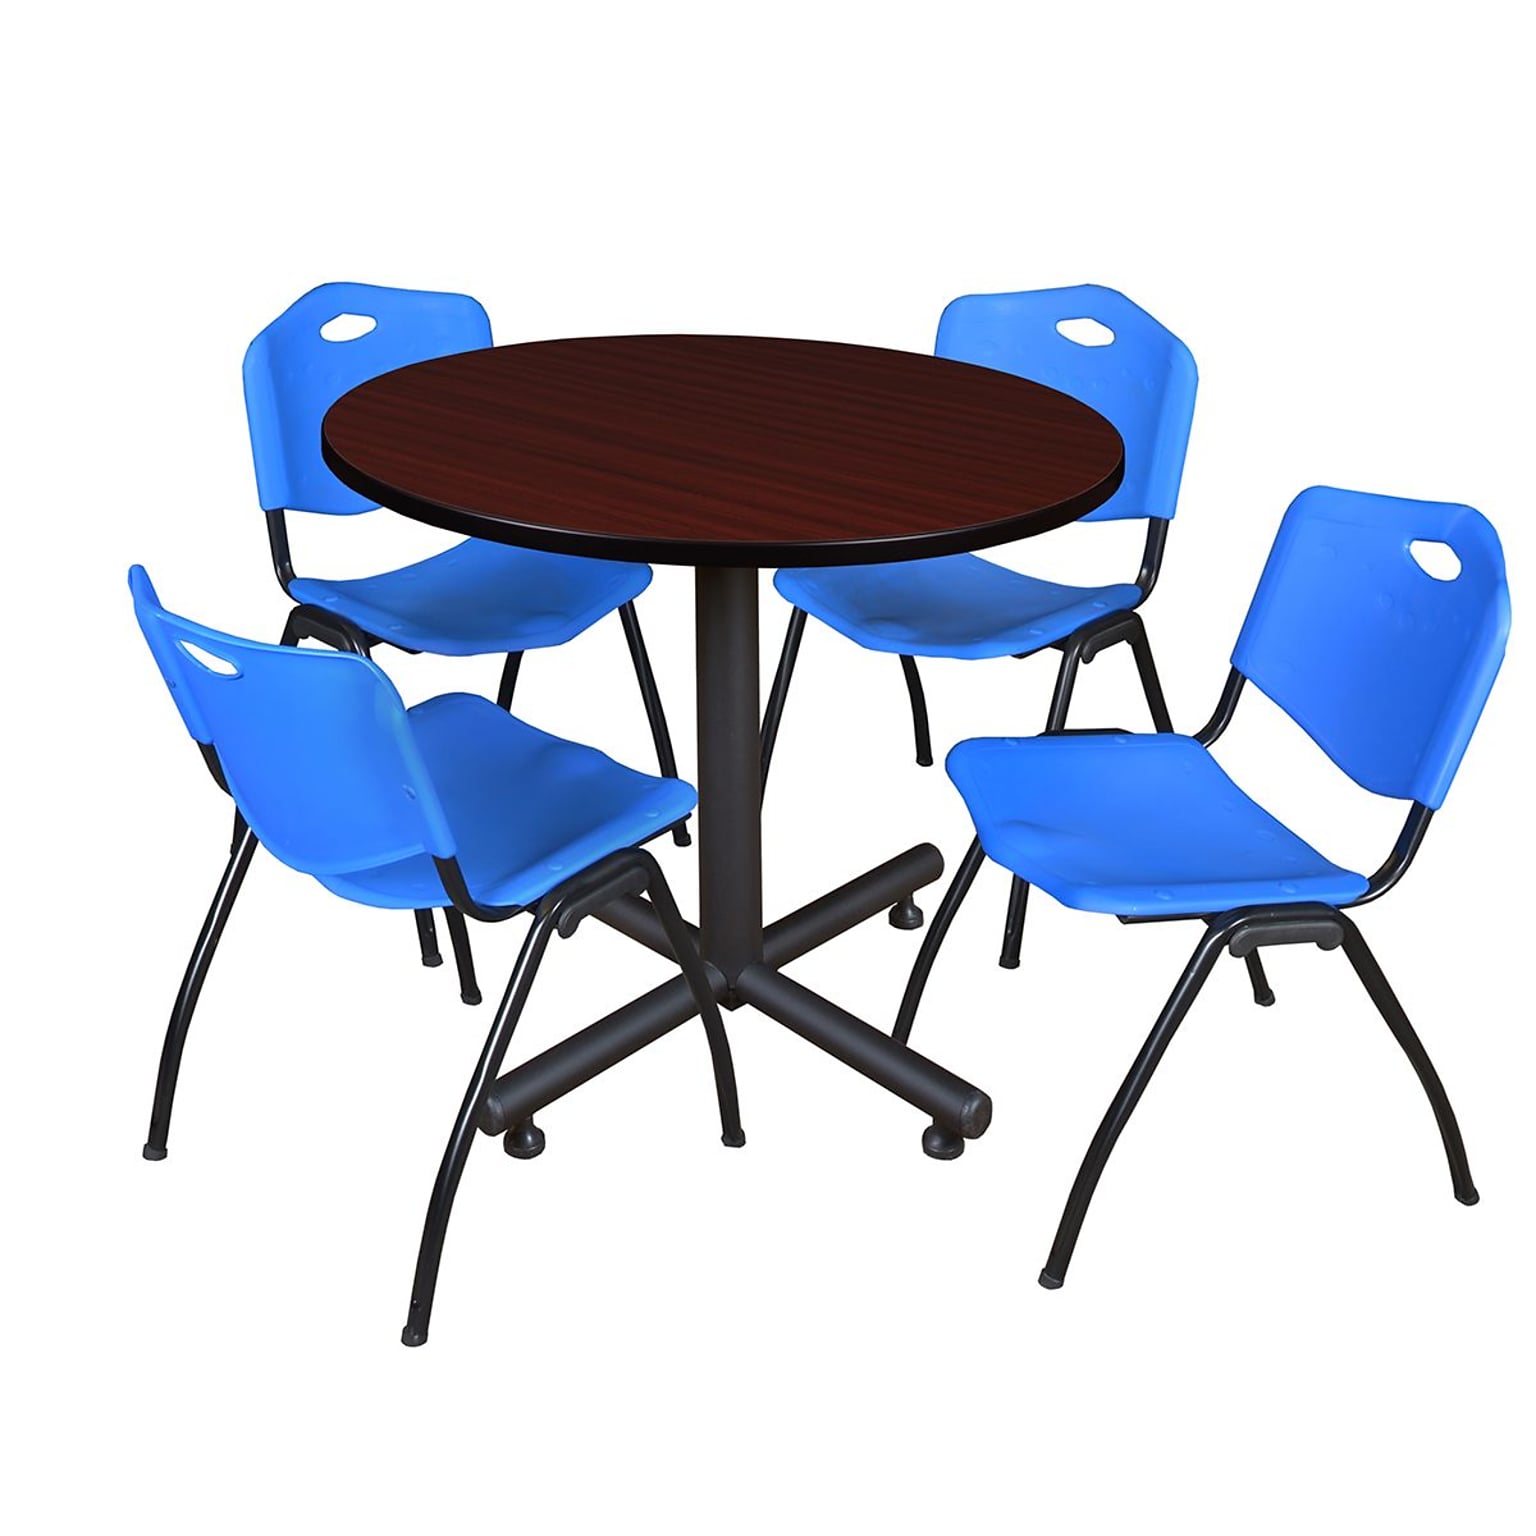 Regency 42-inch Round Laminate Mahogany Training Rooms Table With 4 M Stacker Chairs, Blue (TKB42RNDMH47BE)